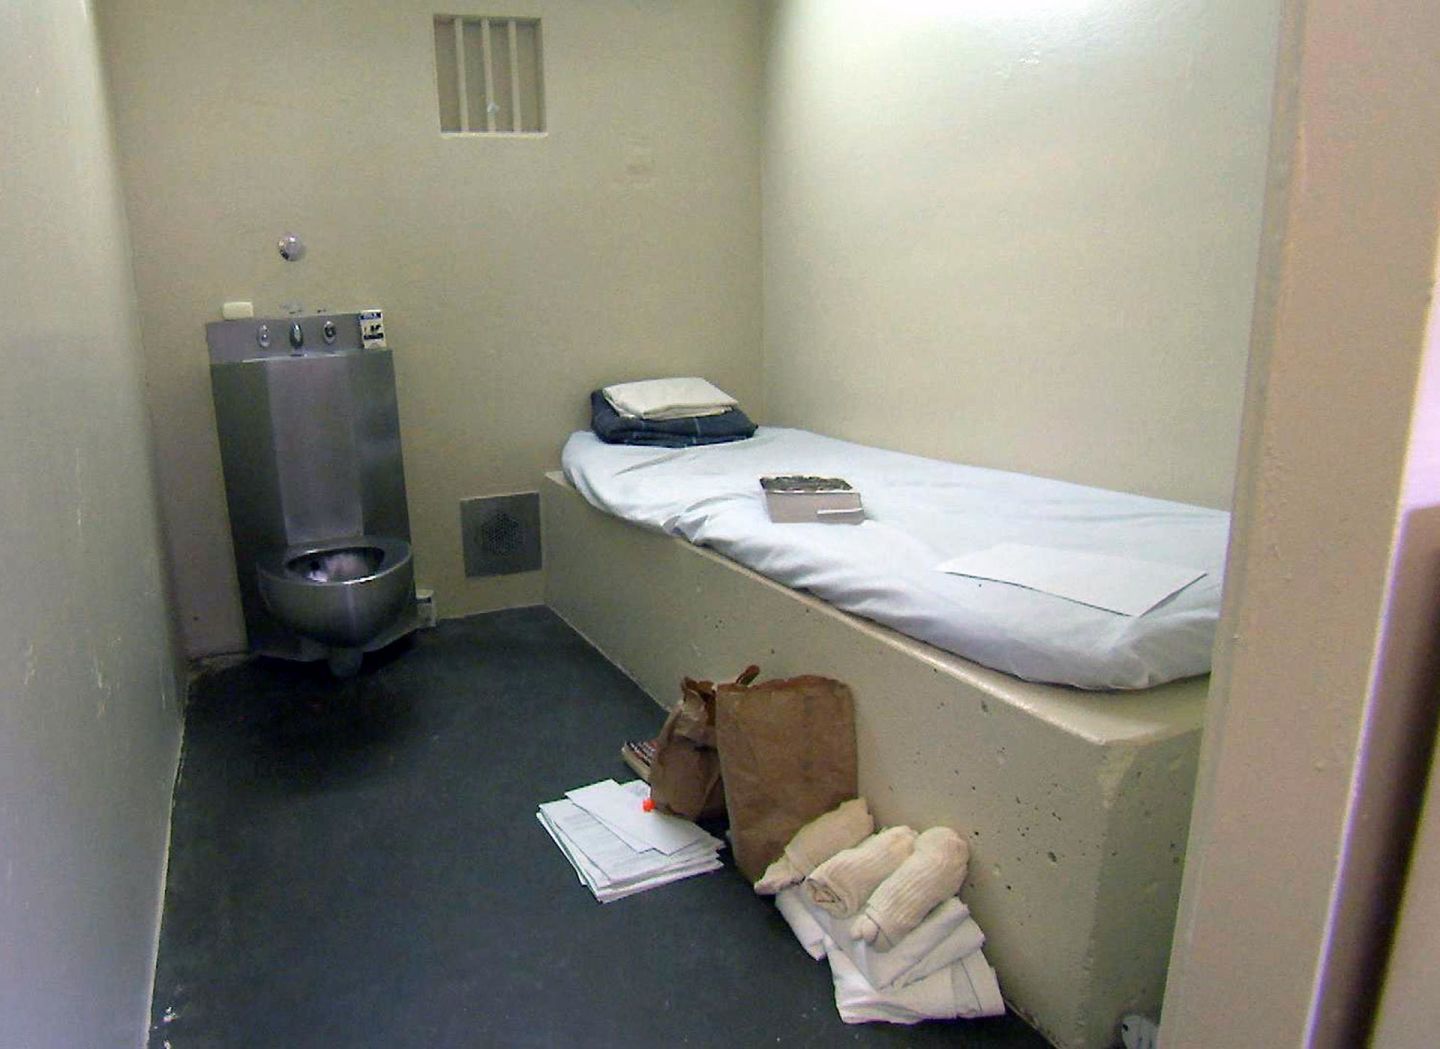 Reforming solitary confinement at an infamous California 